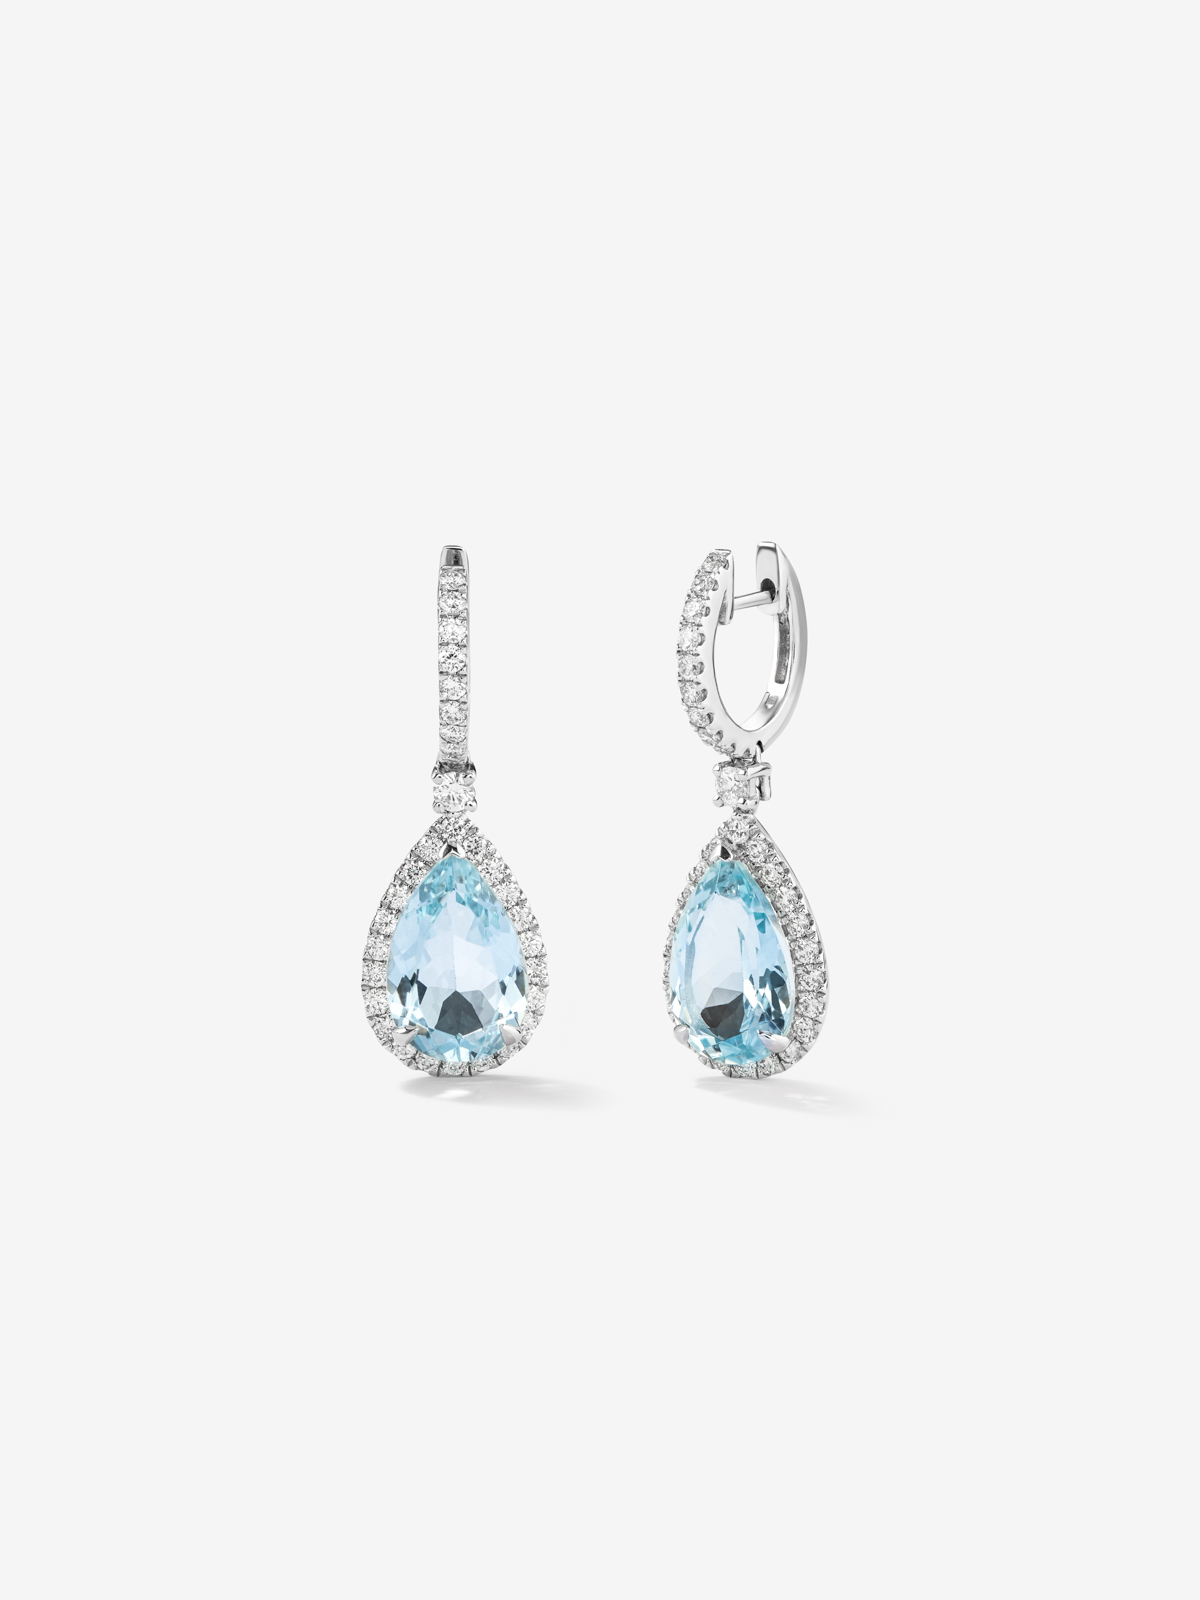 18K white gold earrings with blue aquamarines in 4.97 cts and white diamonds in bright size